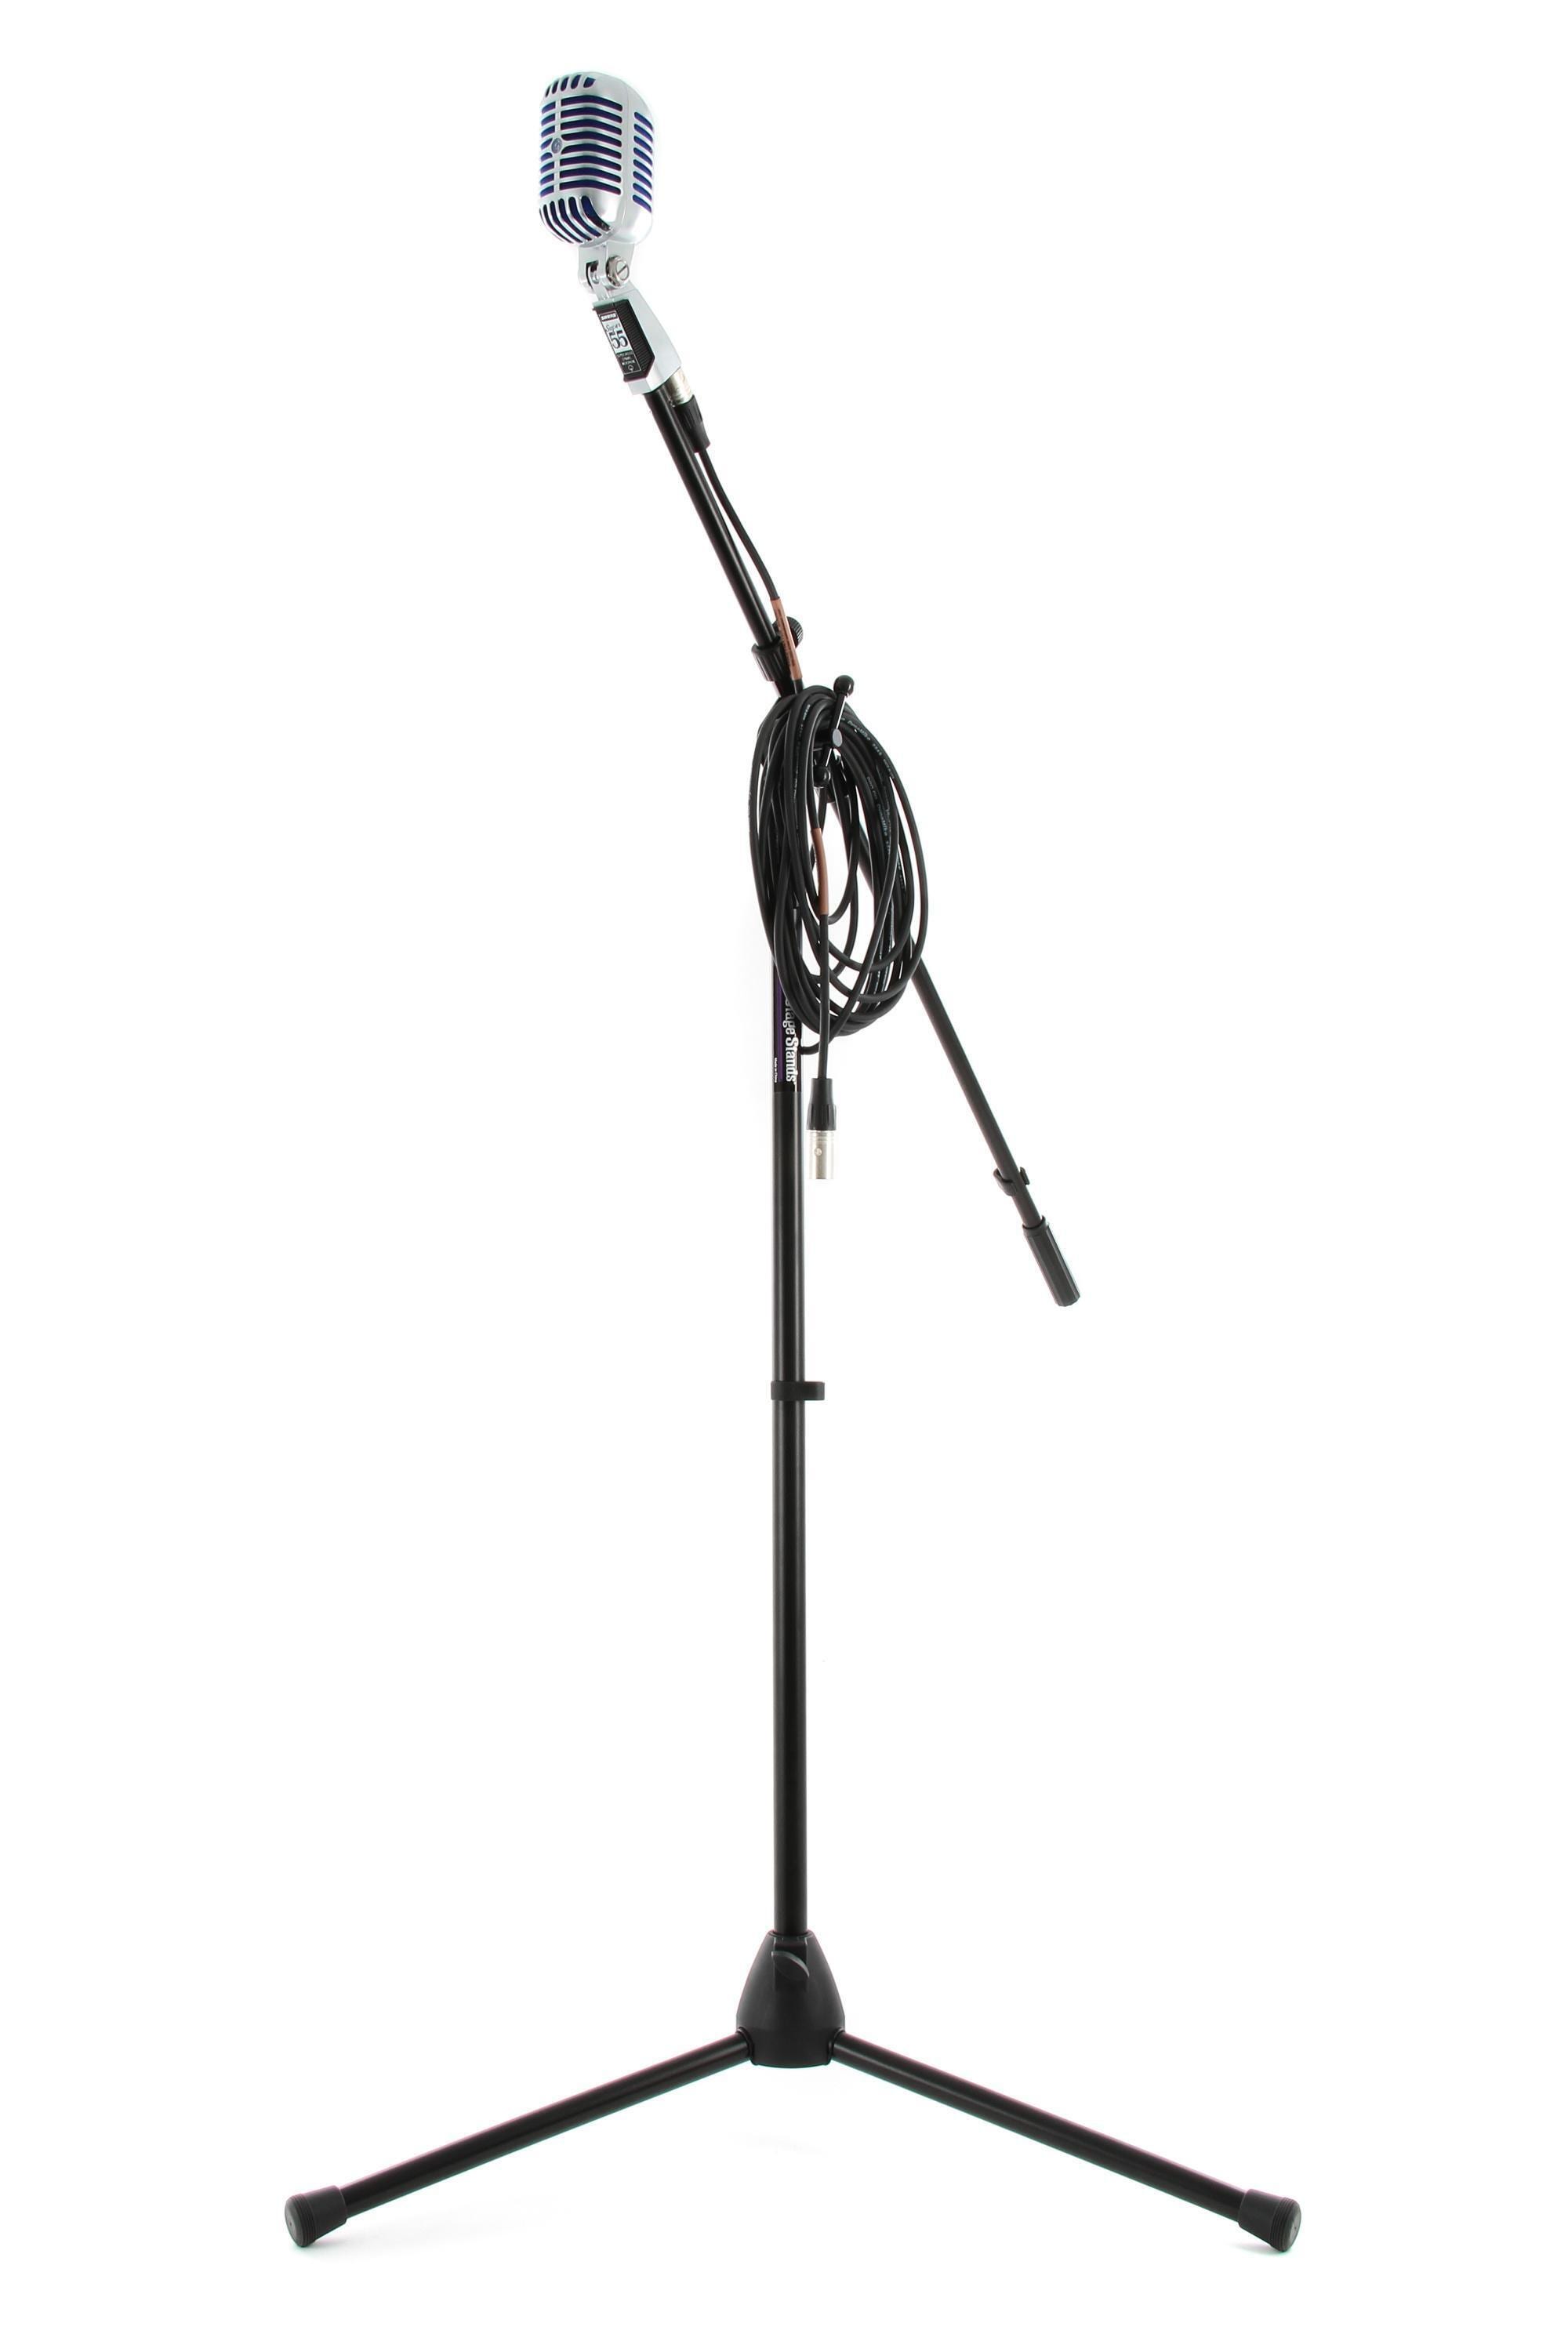 Shure 55SH Series II Iconic Microphone - Vintage Style, Rich Sound Quality,  Rugged Construction, Shock-Mounted Noise Reduction for Vocals 